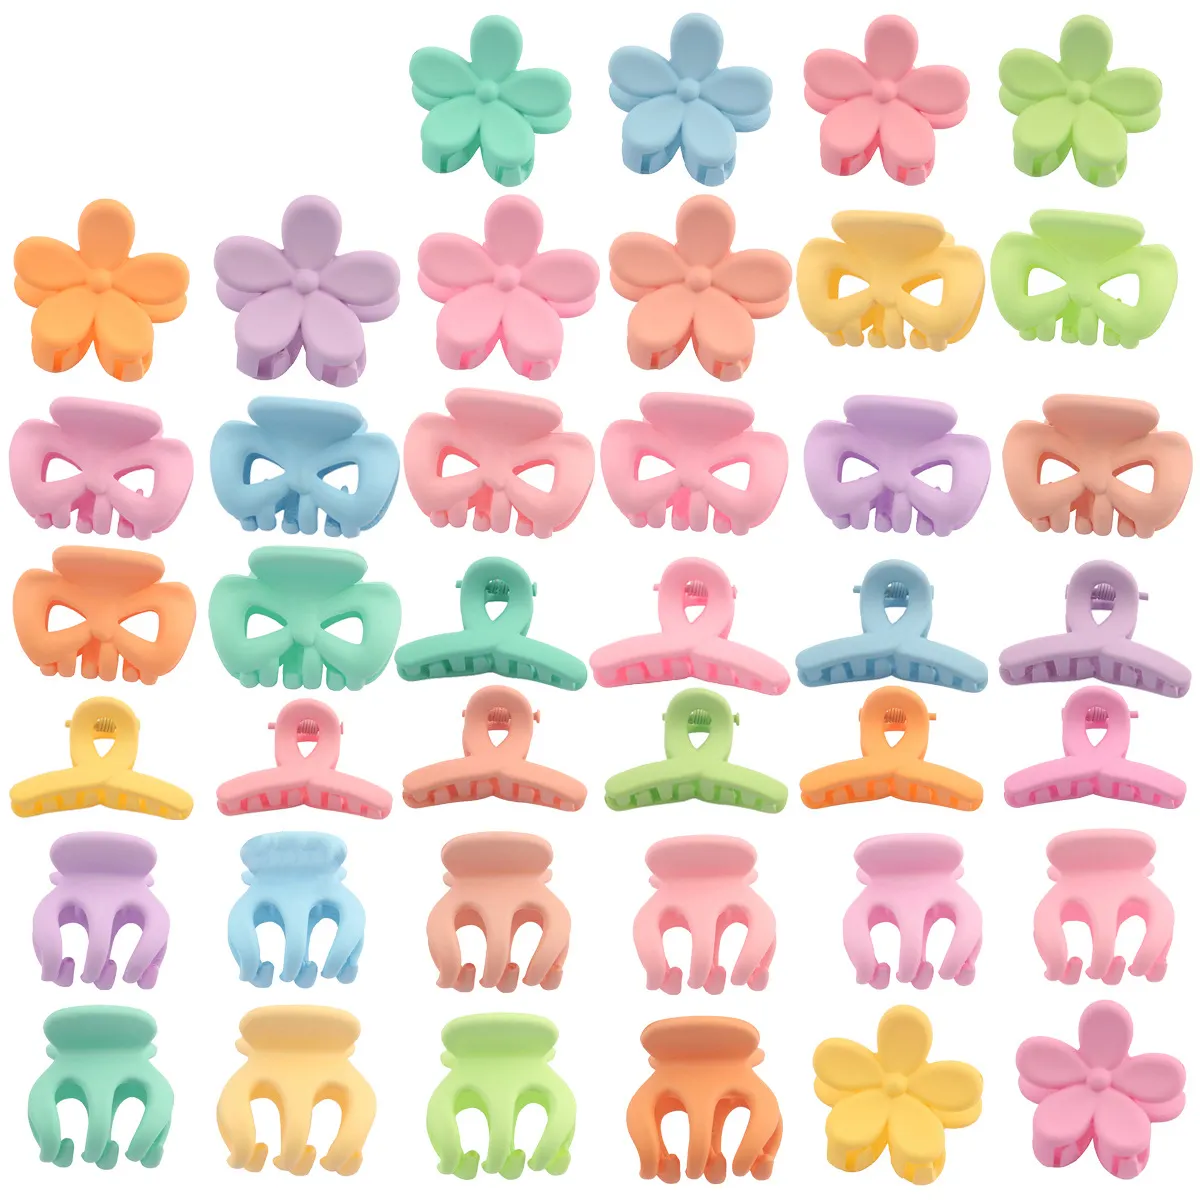 Wholesale Bulk Mixed Batch Hair Accessories Plastic Colorful Flower Bow Crown Love Mini Cute Small Claw Clips For Girl Kid Women